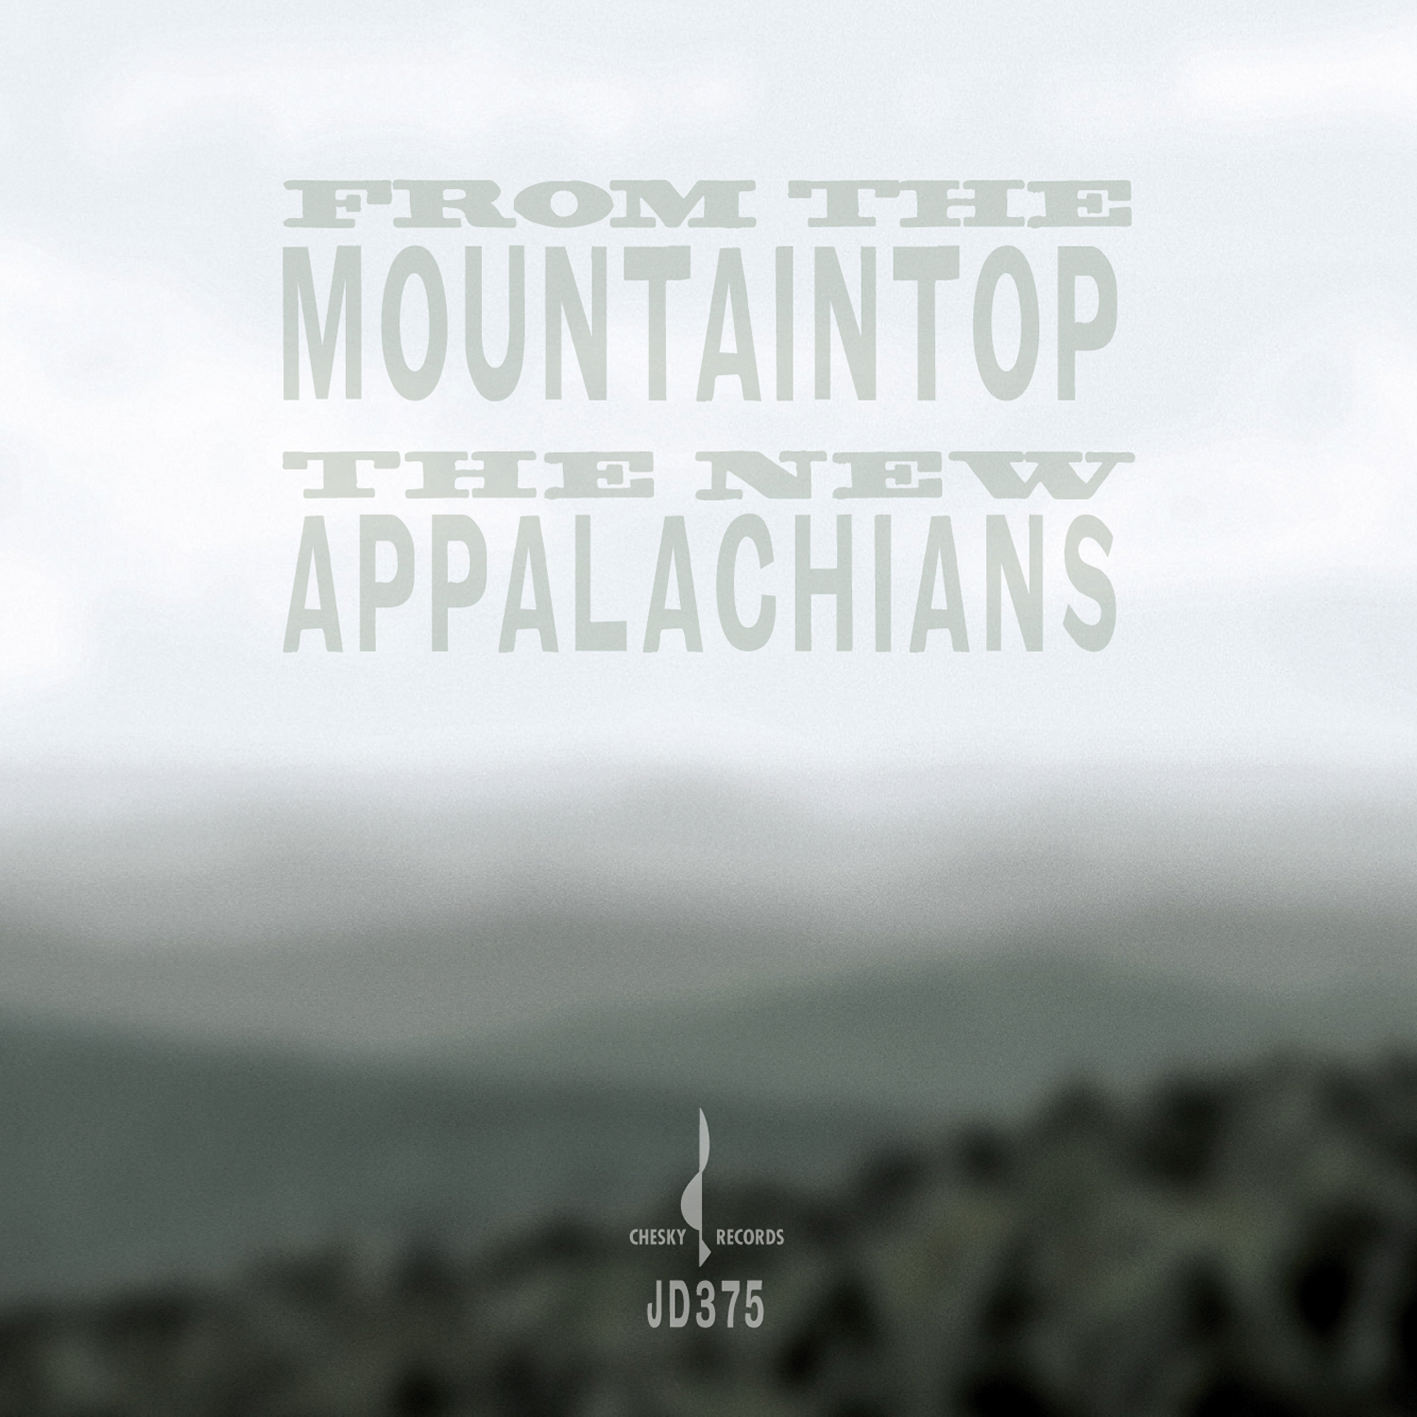 The New Appalachians - From The Mountaintop (2015) [HDTracks FLAC 24bit/192kHz]